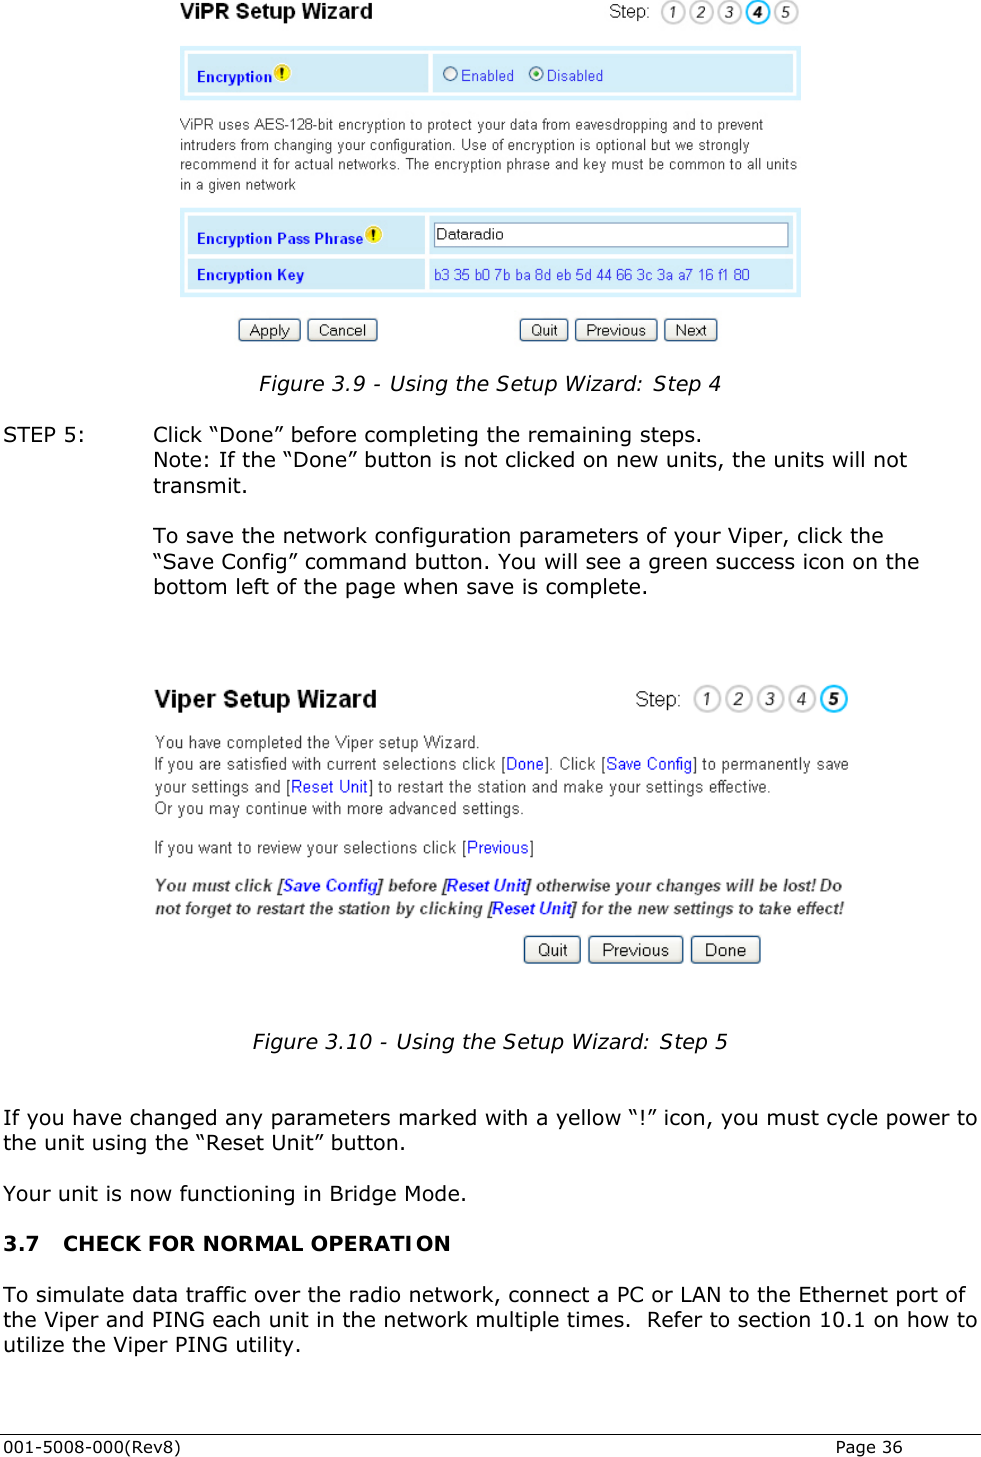  001-5008-000(Rev8)   Page 36  Figure 3.9 - Using the Setup Wizard: Step 4  STEP 5:   Click “Done” before completing the remaining steps. Note: If the “Done” button is not clicked on new units, the units will not transmit.  To save the network configuration parameters of your Viper, click the  “Save Config” command button. You will see a green success icon on the bottom left of the page when save is complete.    Figure 3.10 - Using the Setup Wizard: Step 5   If you have changed any parameters marked with a yellow “!” icon, you must cycle power to the unit using the “Reset Unit” button.  Your unit is now functioning in Bridge Mode. 3.7 CHECK FOR NORMAL OPERATION To simulate data traffic over the radio network, connect a PC or LAN to the Ethernet port of the Viper and PING each unit in the network multiple times.  Refer to section 10.1 on how to utilize the Viper PING utility.                      